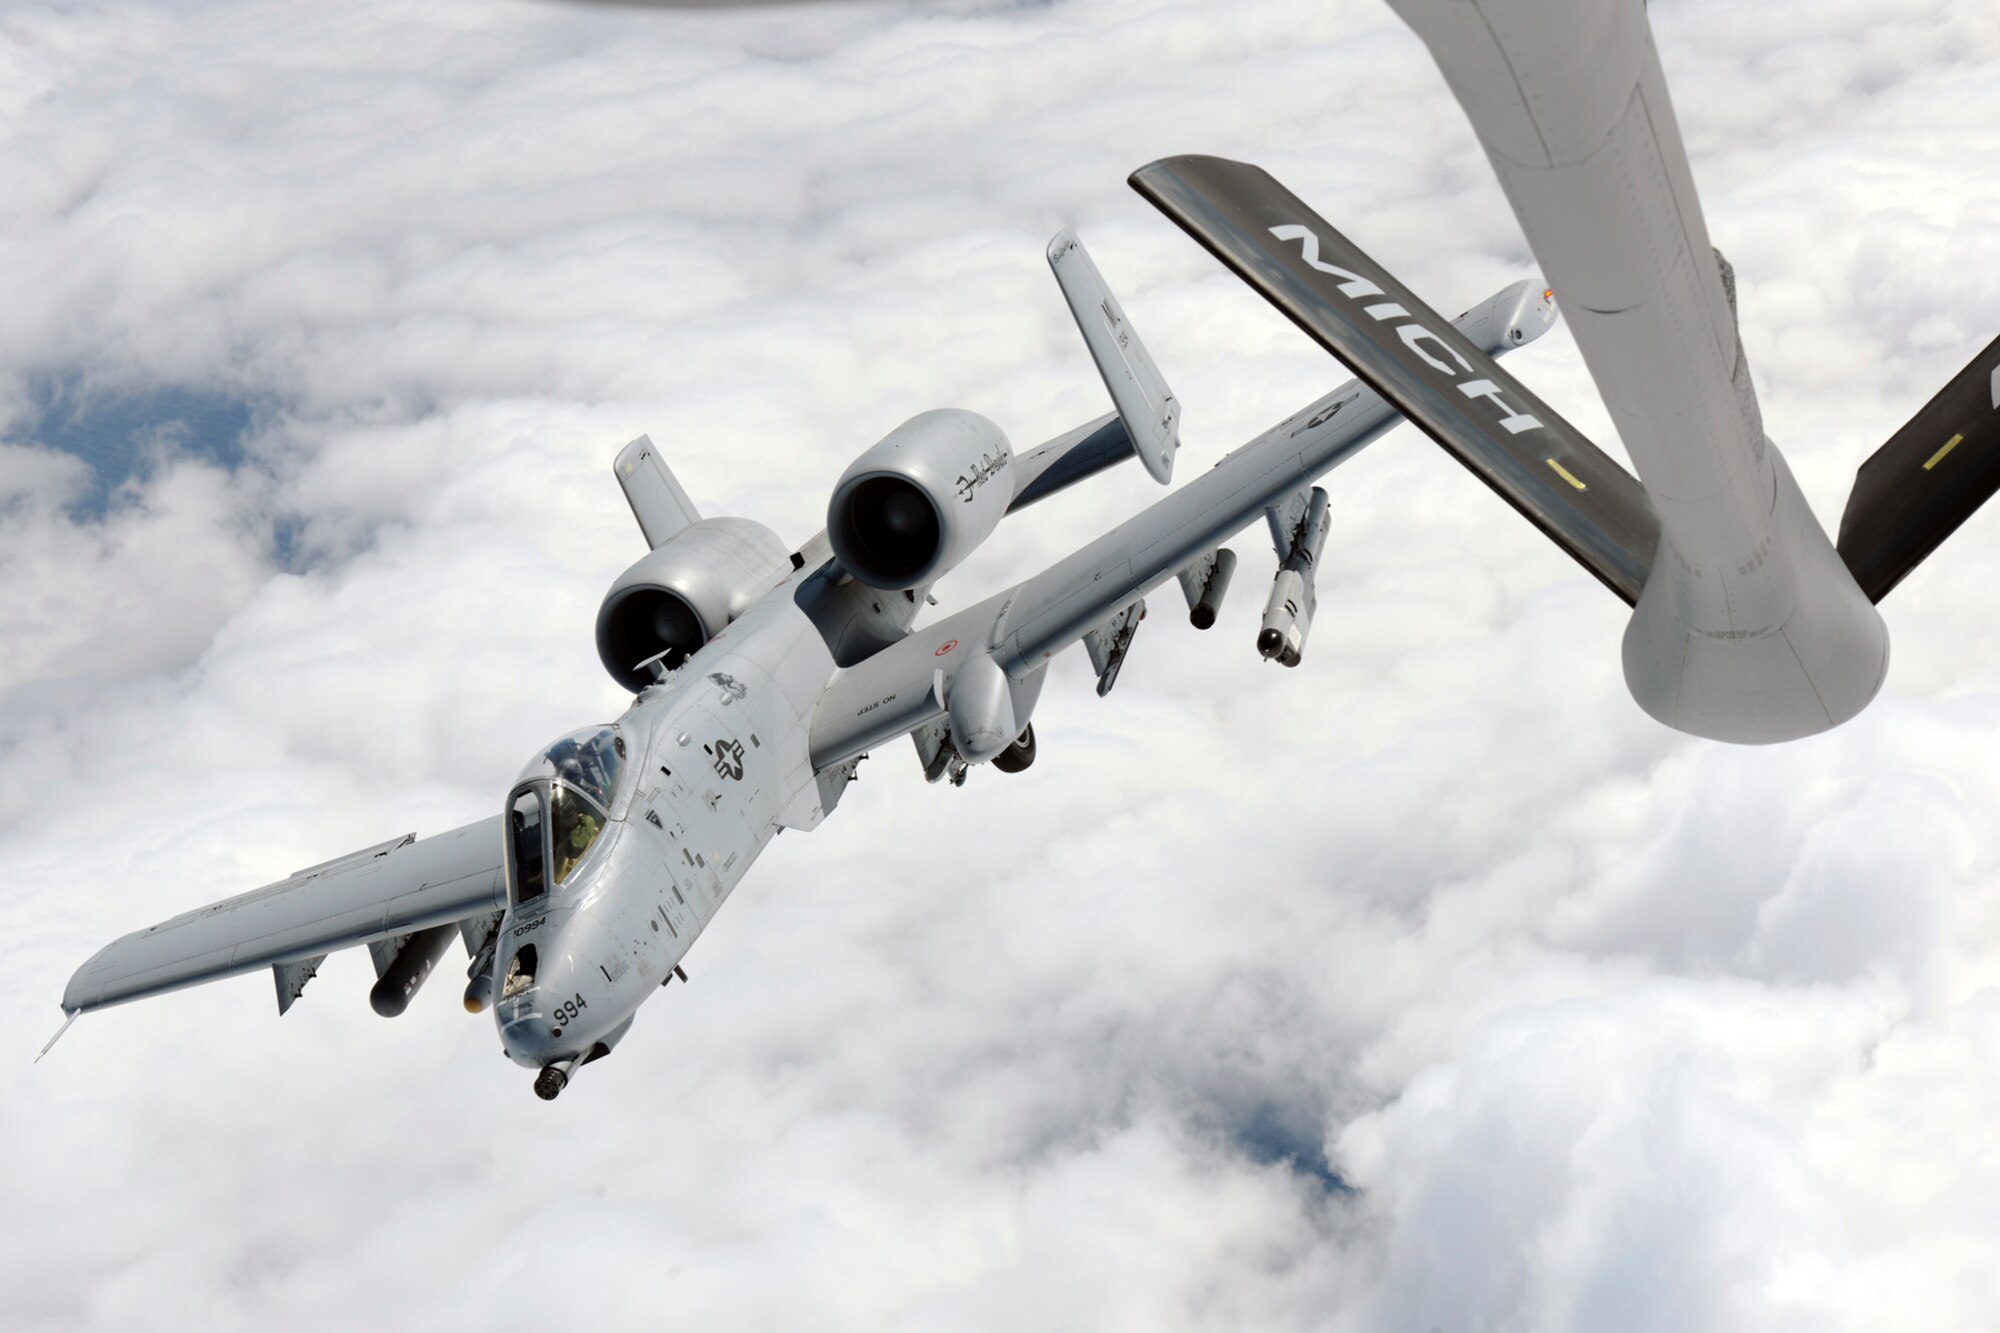 130913-Z-EZ686-175 -- An A-10C Thunderbolt II flown by the 107th Fighter Squadron, departs after completing air-to-air refueling from a KC135 Stratotanker flown by the 171st Air Refueling Squadron, while over the “Thumb” region of Michigan, Sept. 13, 2013. Both units are assigned to the Michigan Air National Guard and stationed at Selfridge Air National Guard Base, Mich. (U.S. Air National Guard photos by MSgt. David Kujawa/Released)